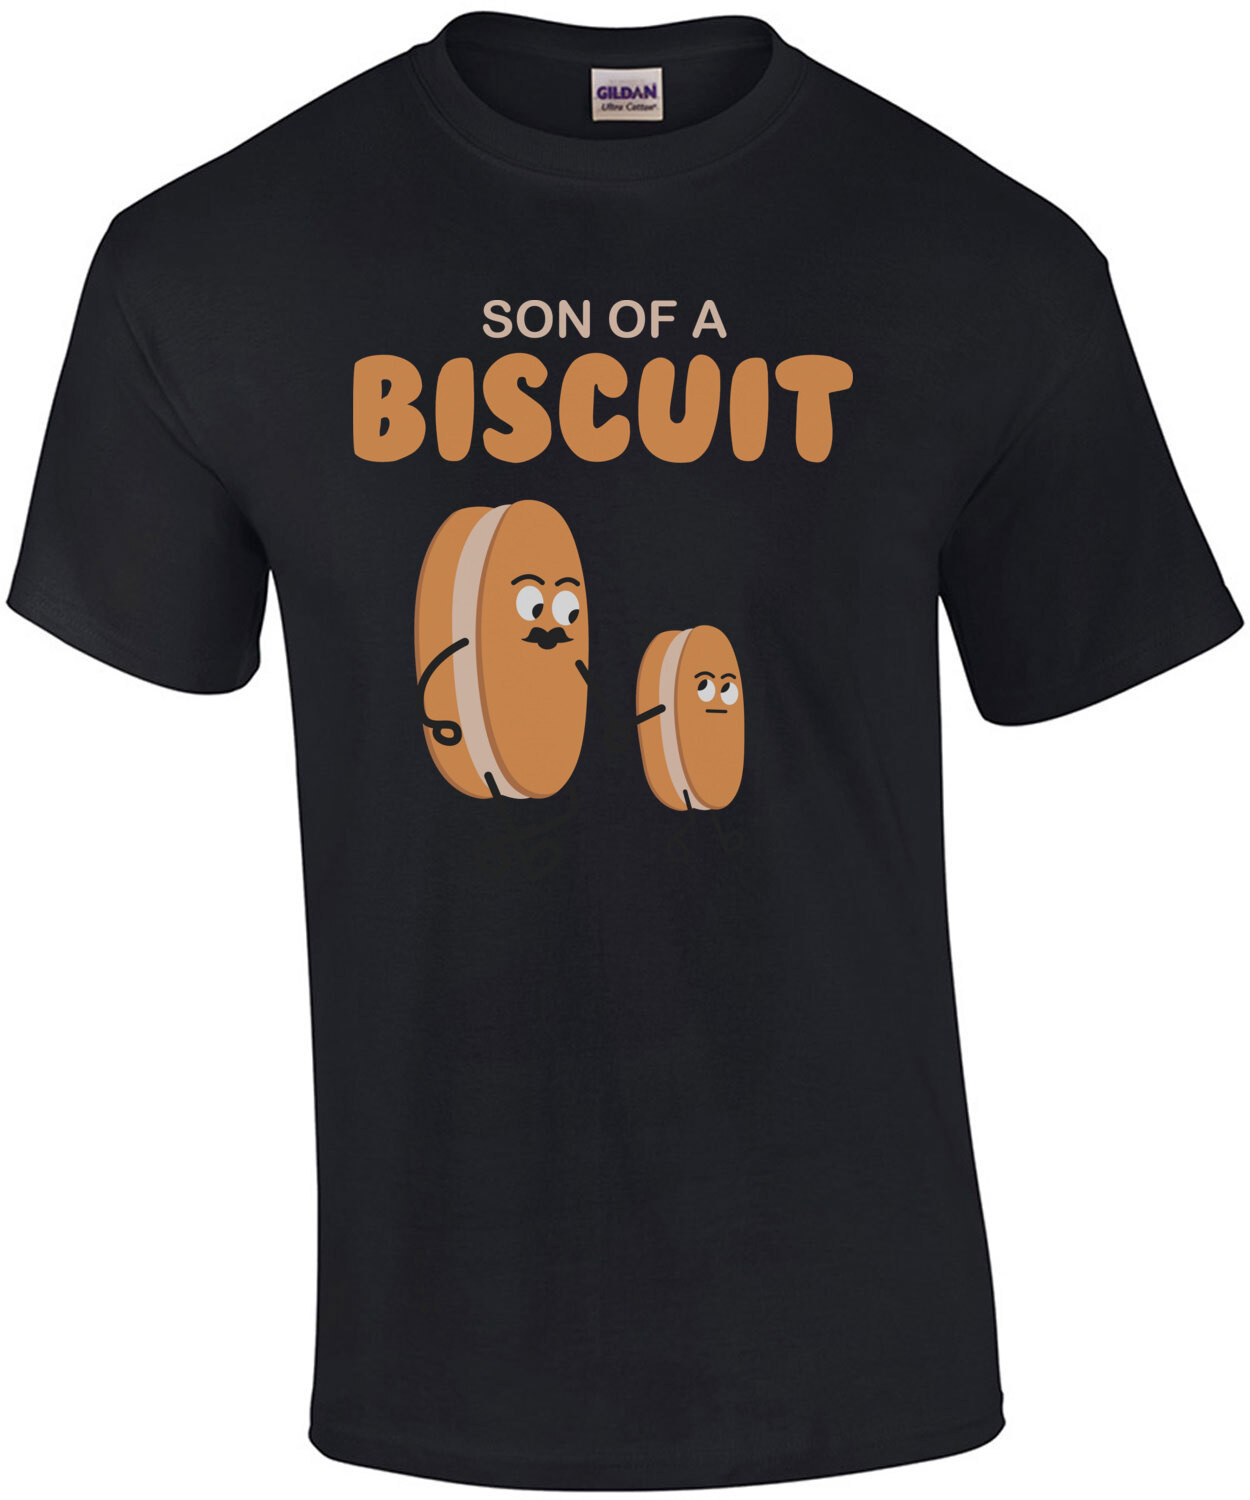 Son of a biscuit - funny pun t-shirt